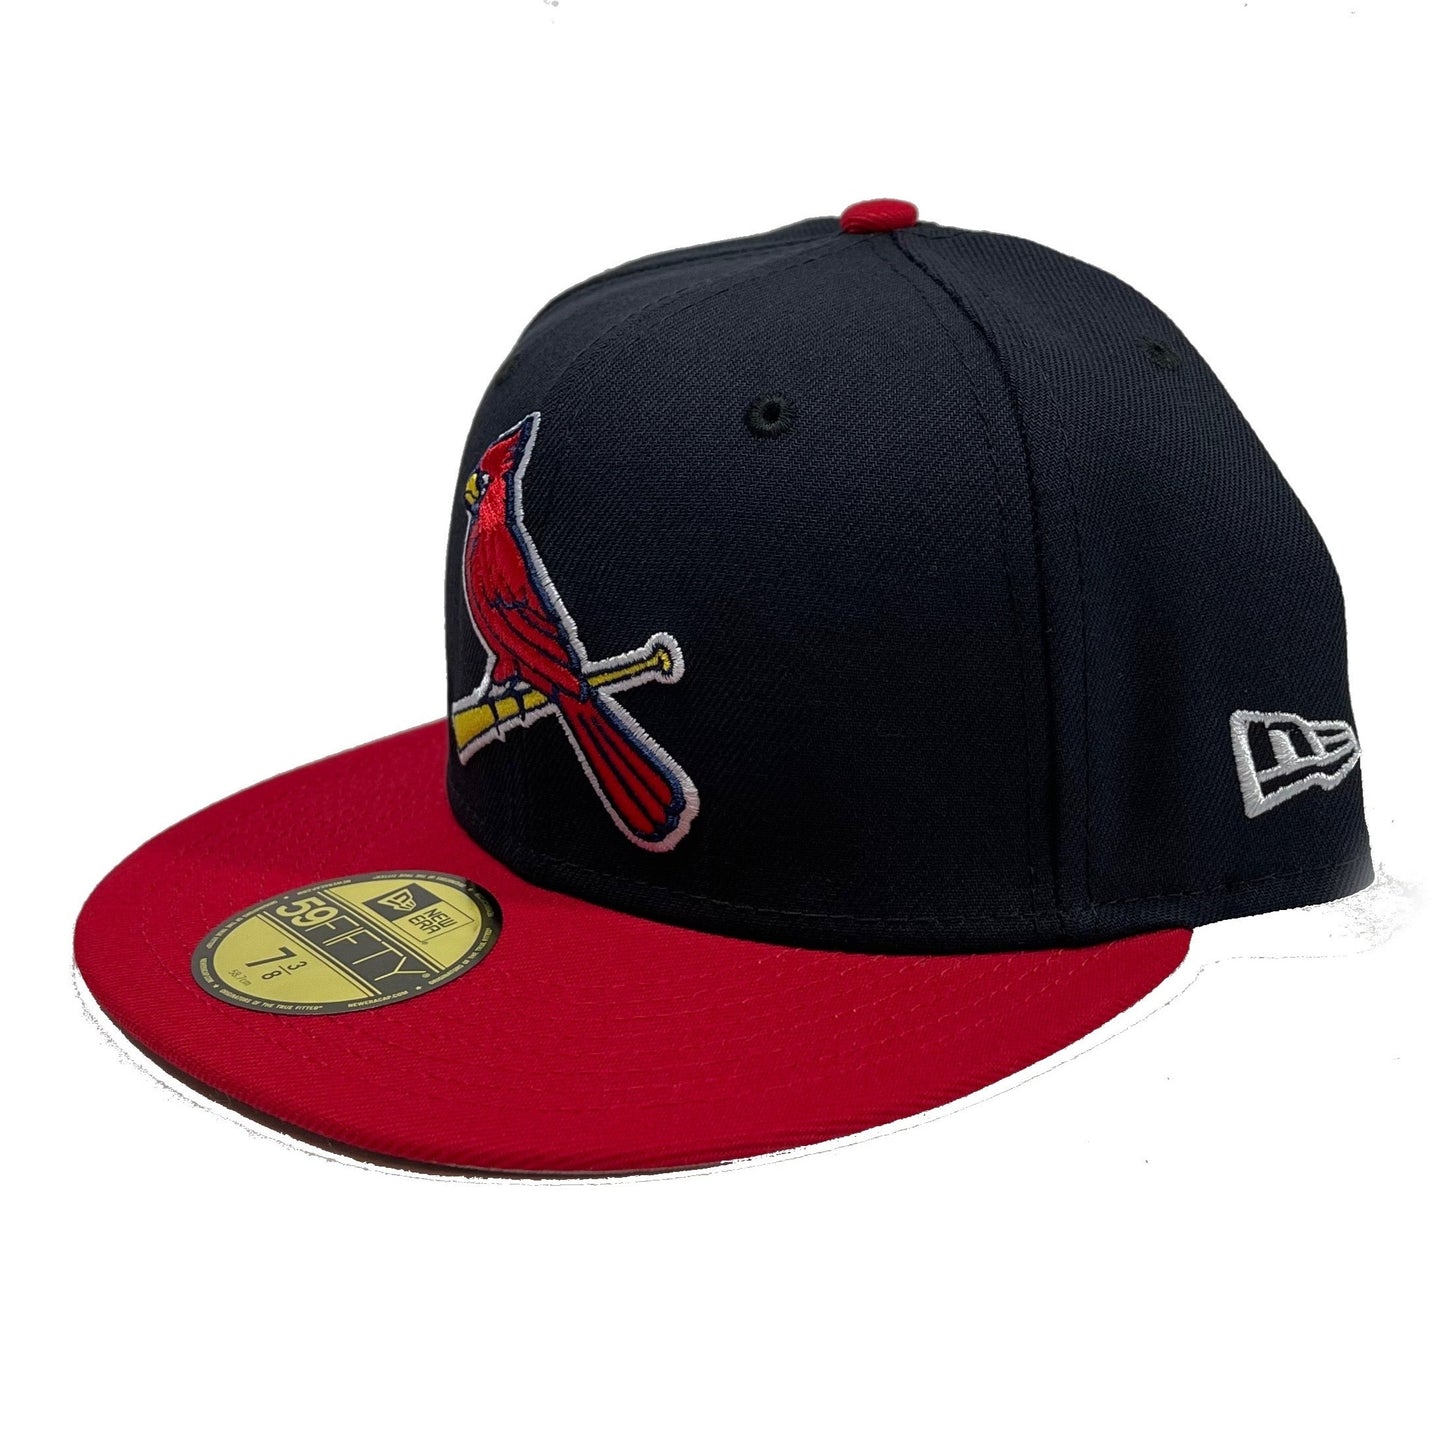 St. Louis Cardinals (Blue) Fitted